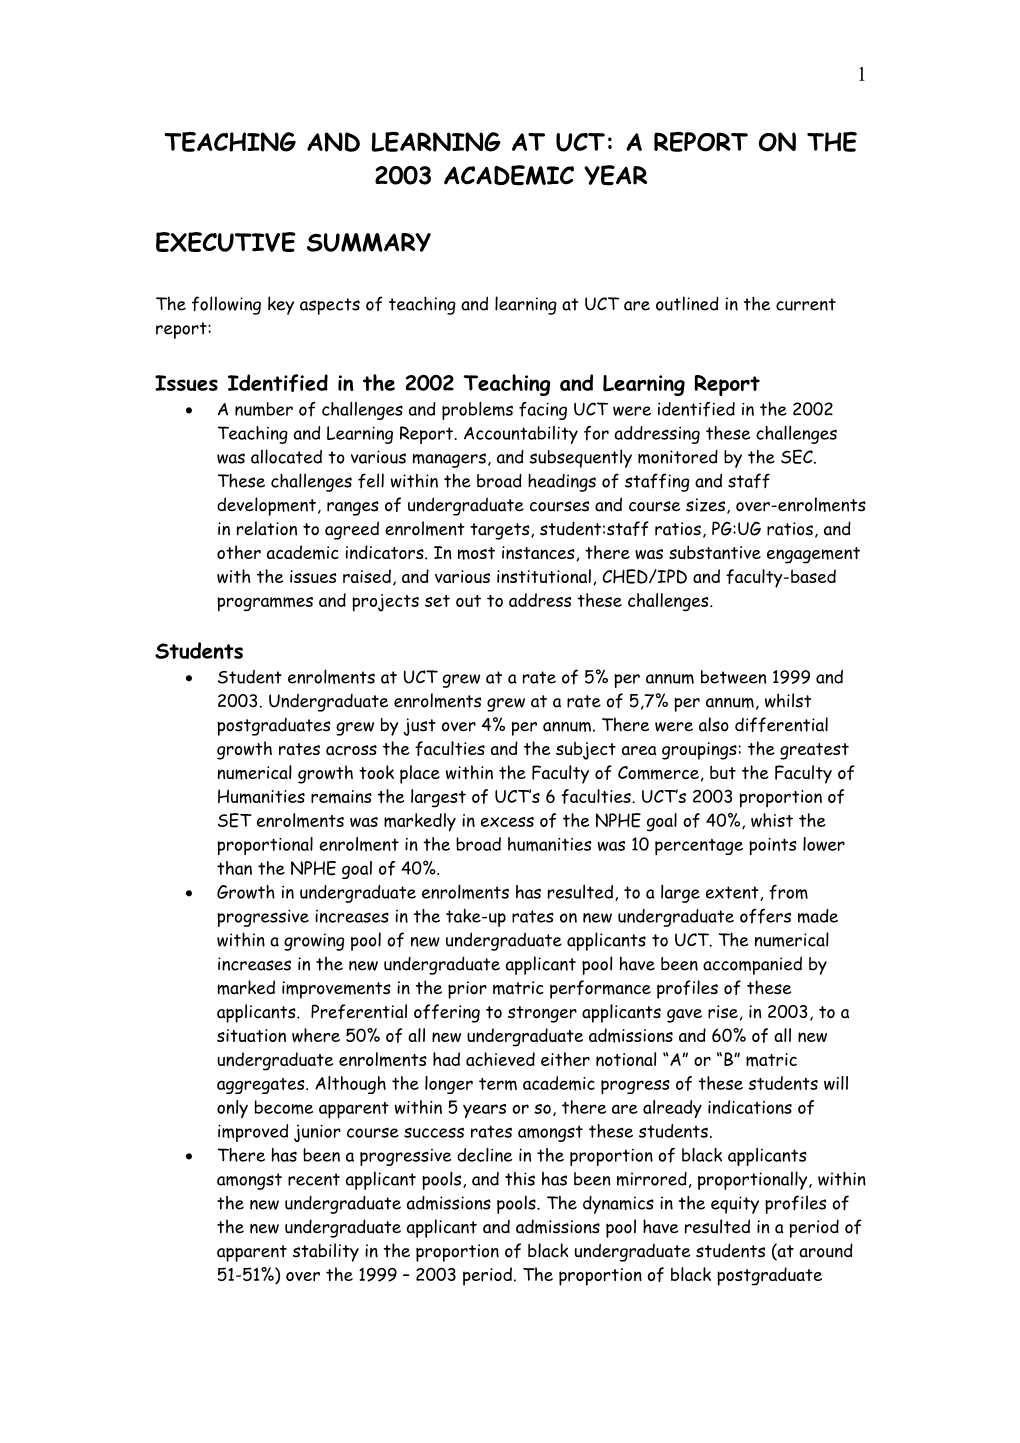 Teaching and Learning at Uct: a Report on the 2002 Academic Year